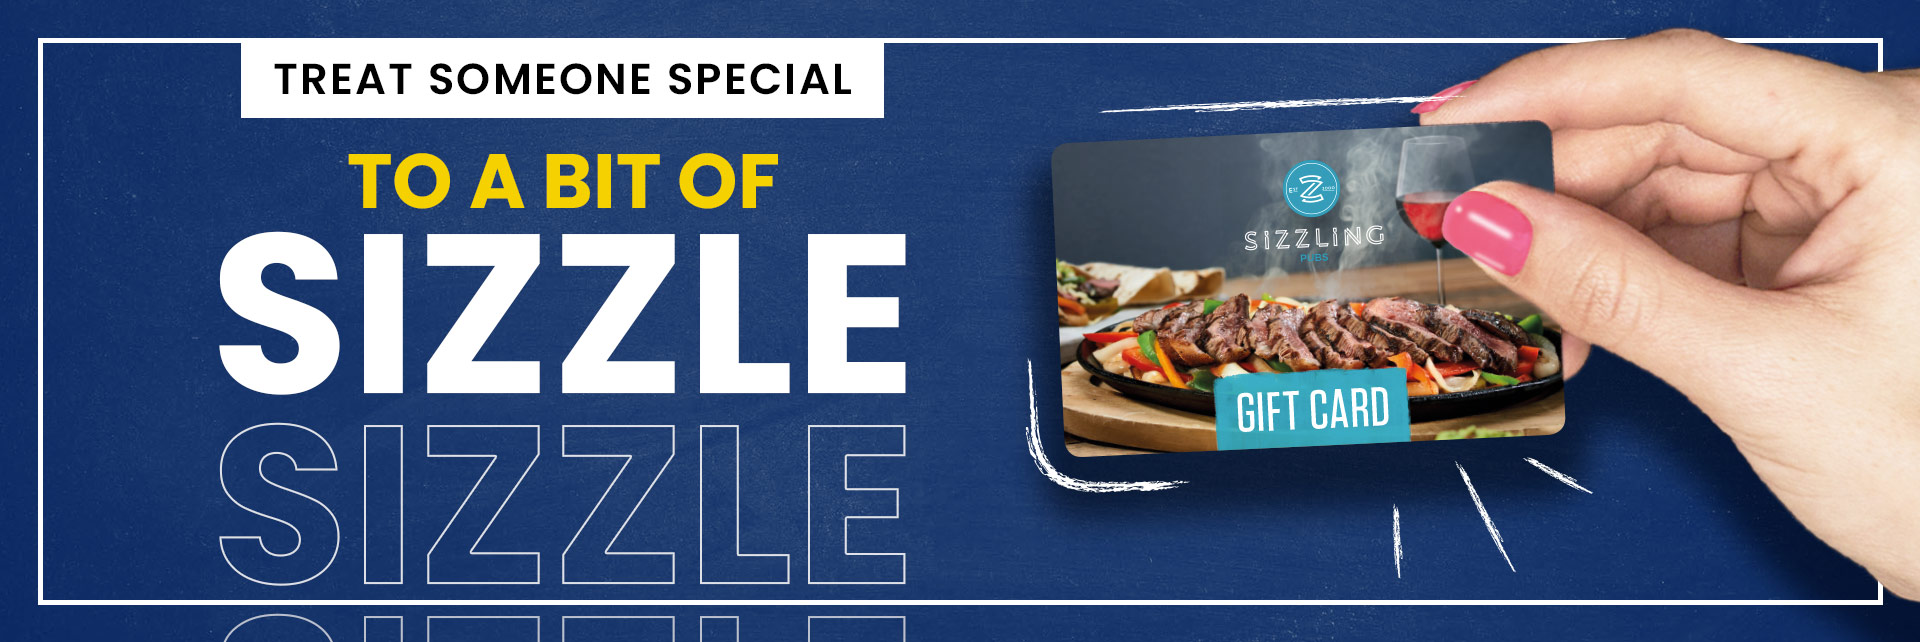 Sizzling Pubs Gift Card at The Woolpack in Telford